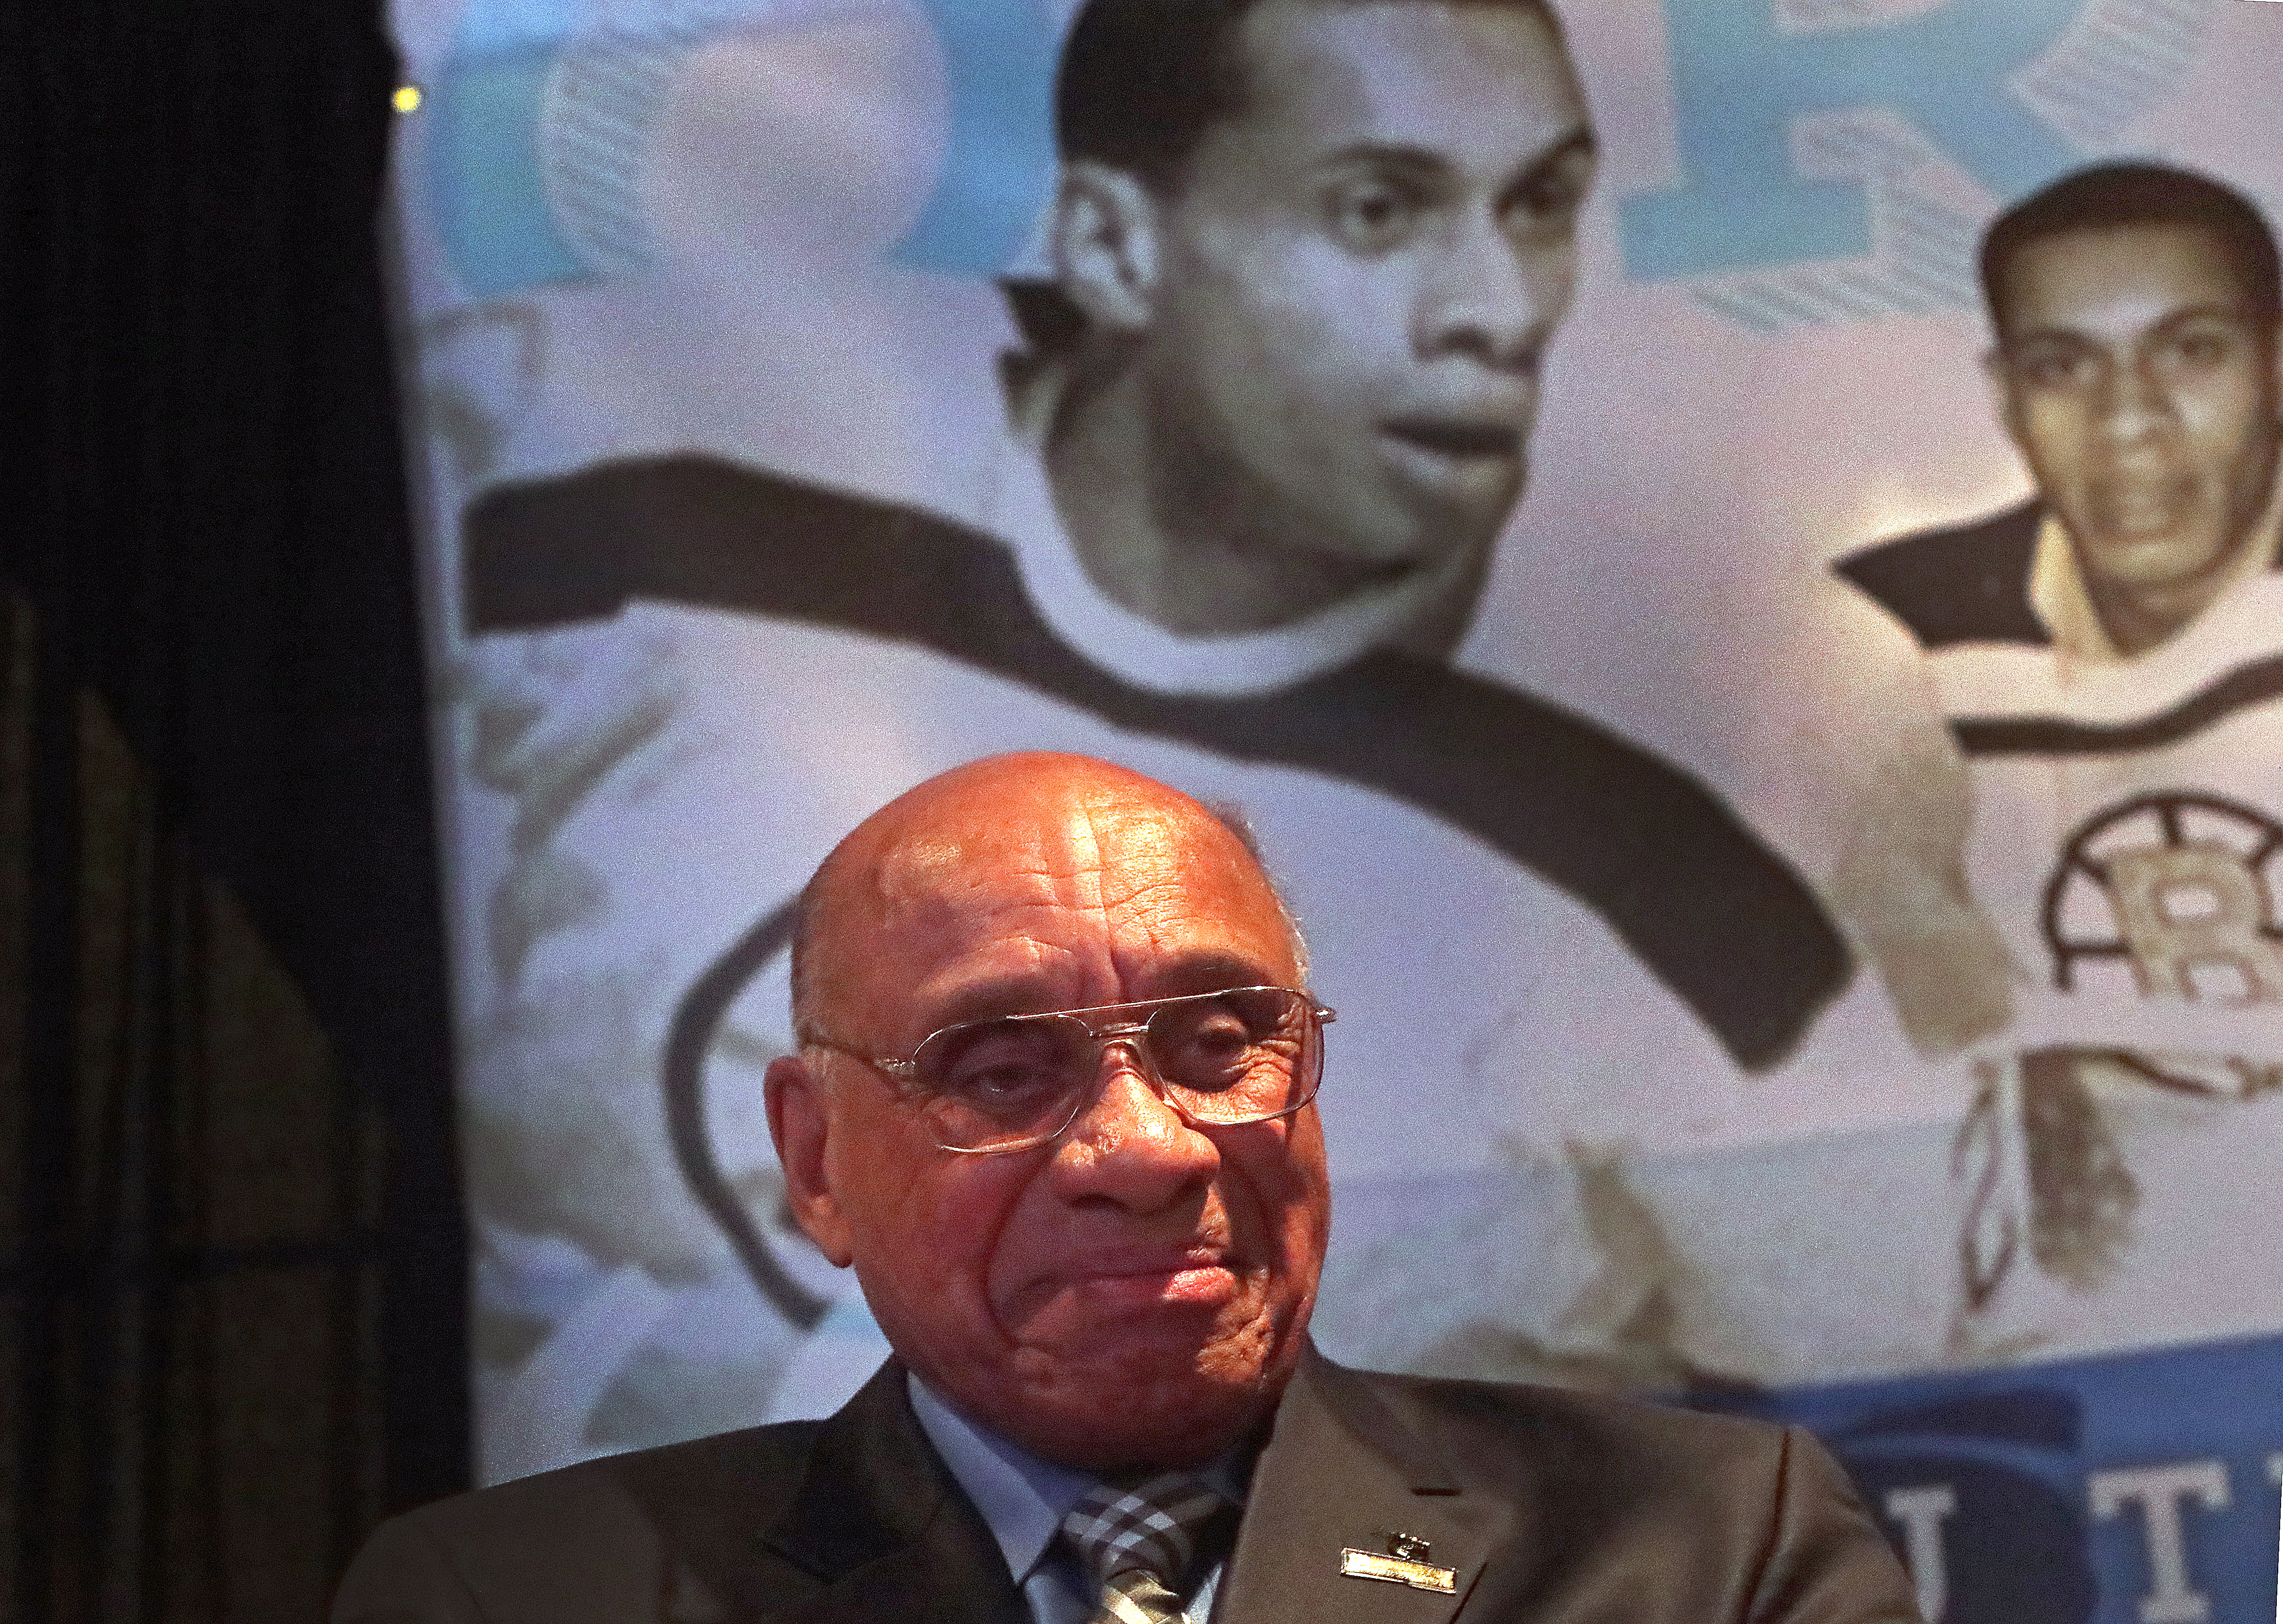 Willie O'Ree, who broke the NHL's color barrier, to have jersey retired by  the Boston Bruins – The Virginian-Pilot